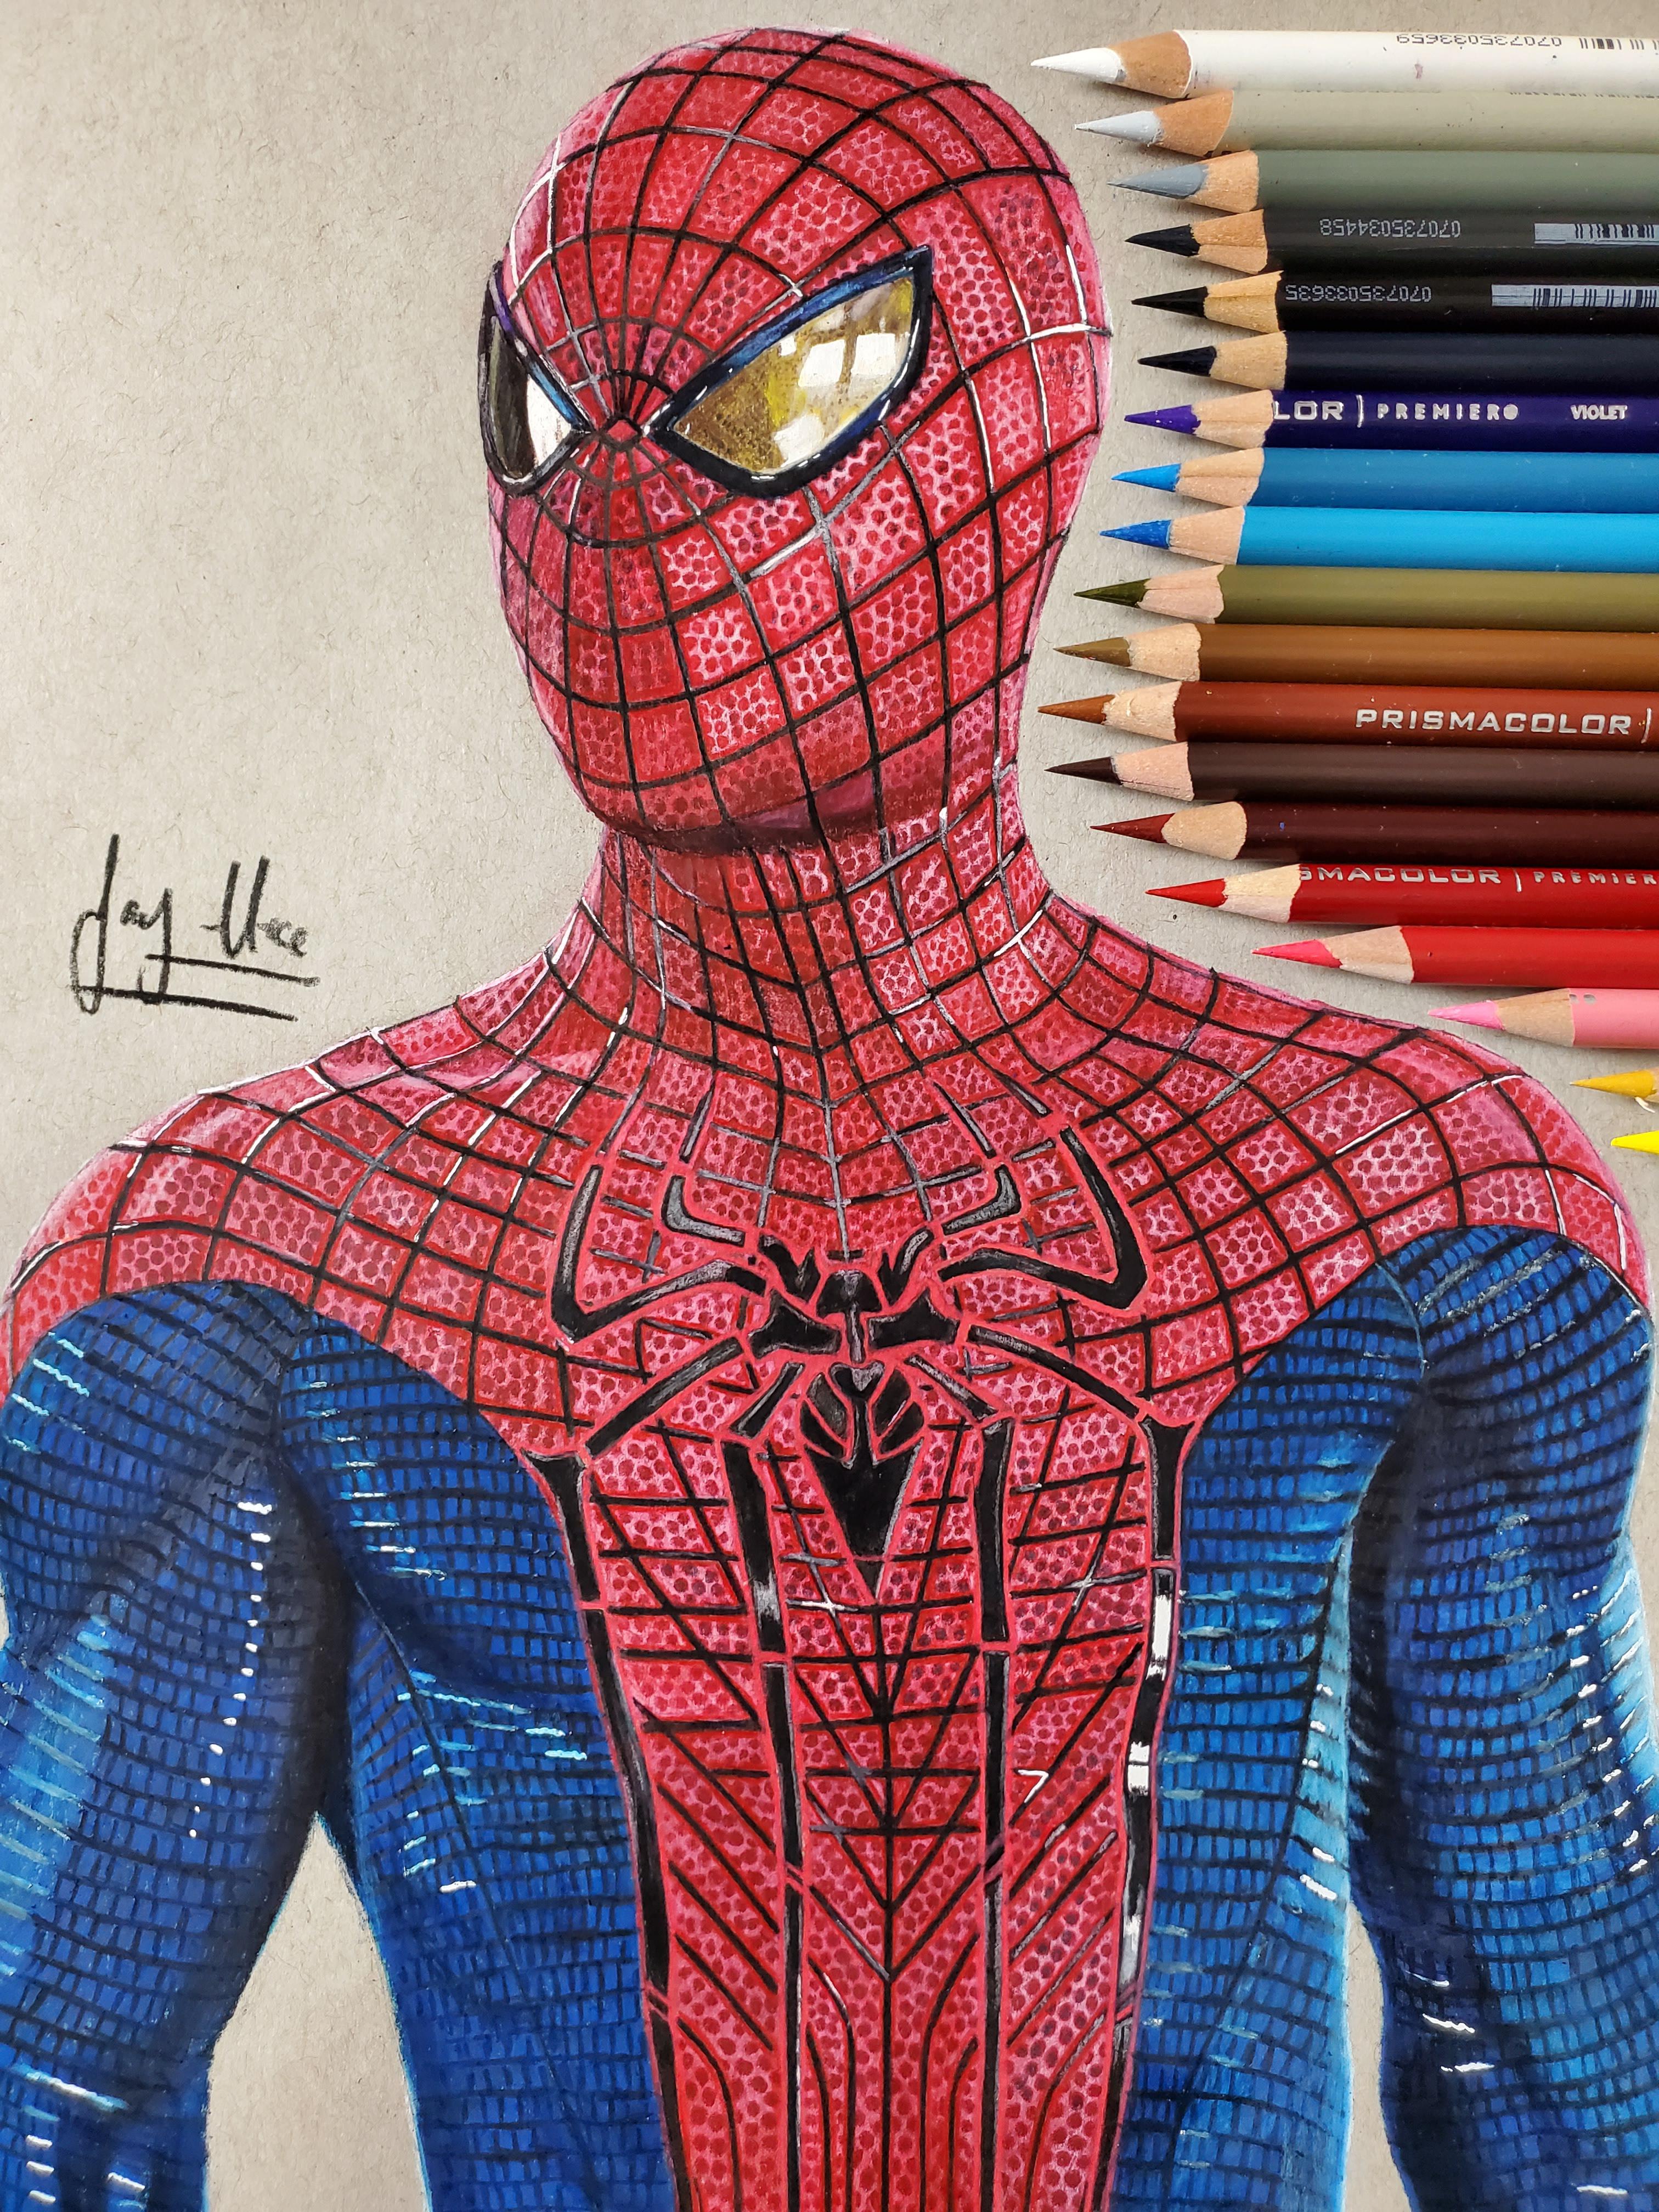 Wanted to share a drawing i made of spiderman this took me around hours rnextfuckinglevel